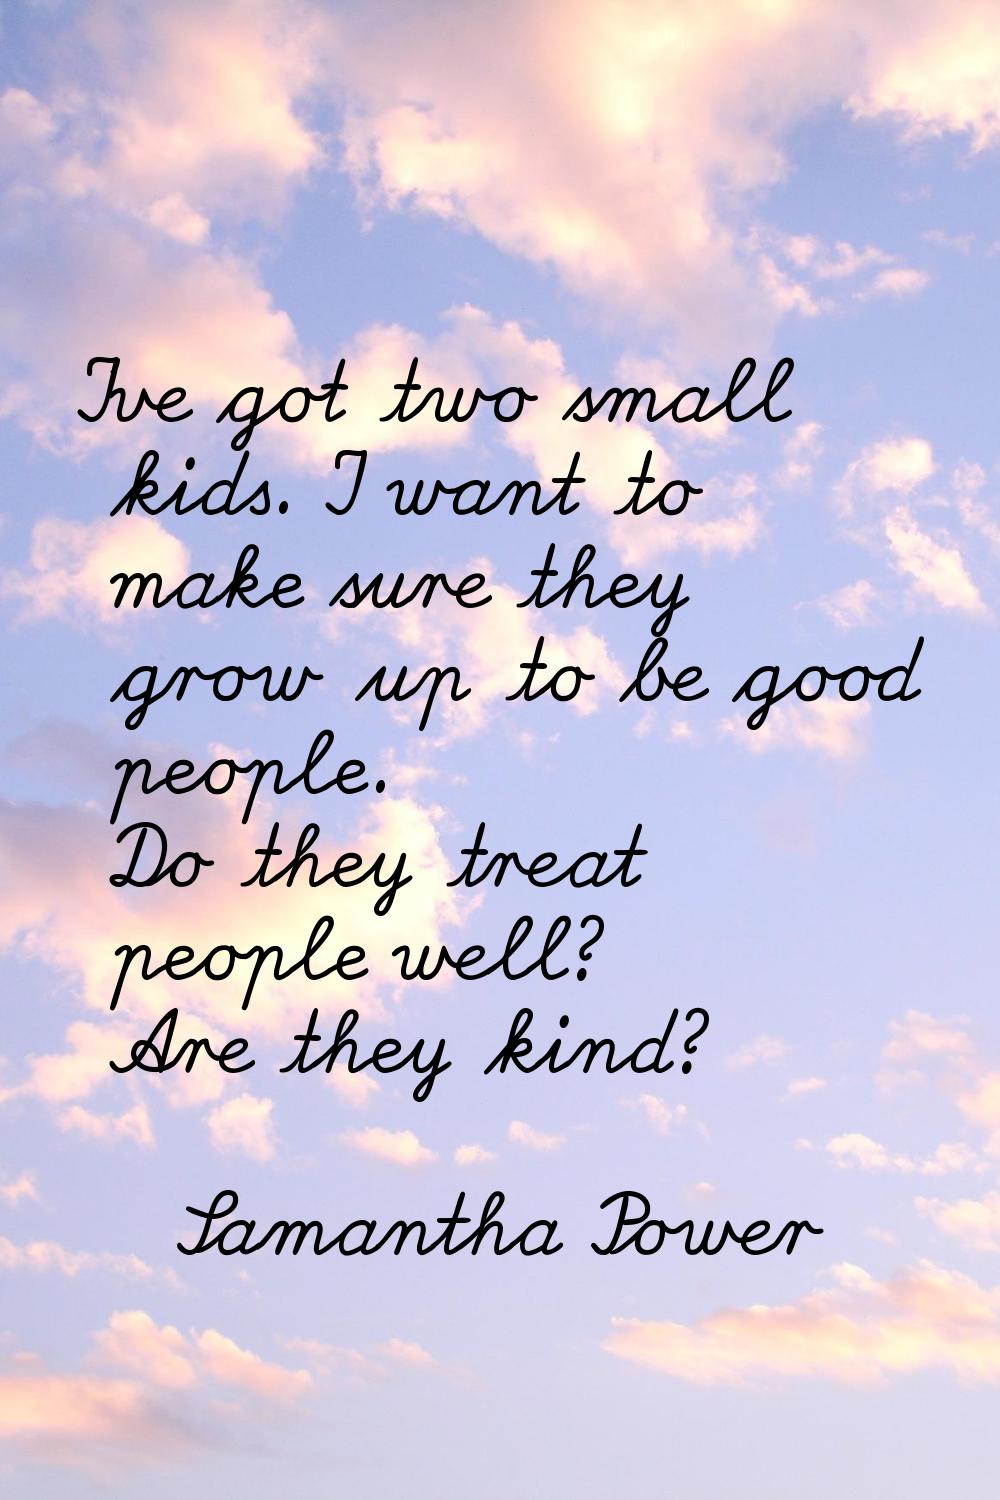 I've got two small kids. I want to make sure they grow up to be good people. Do they treat people w